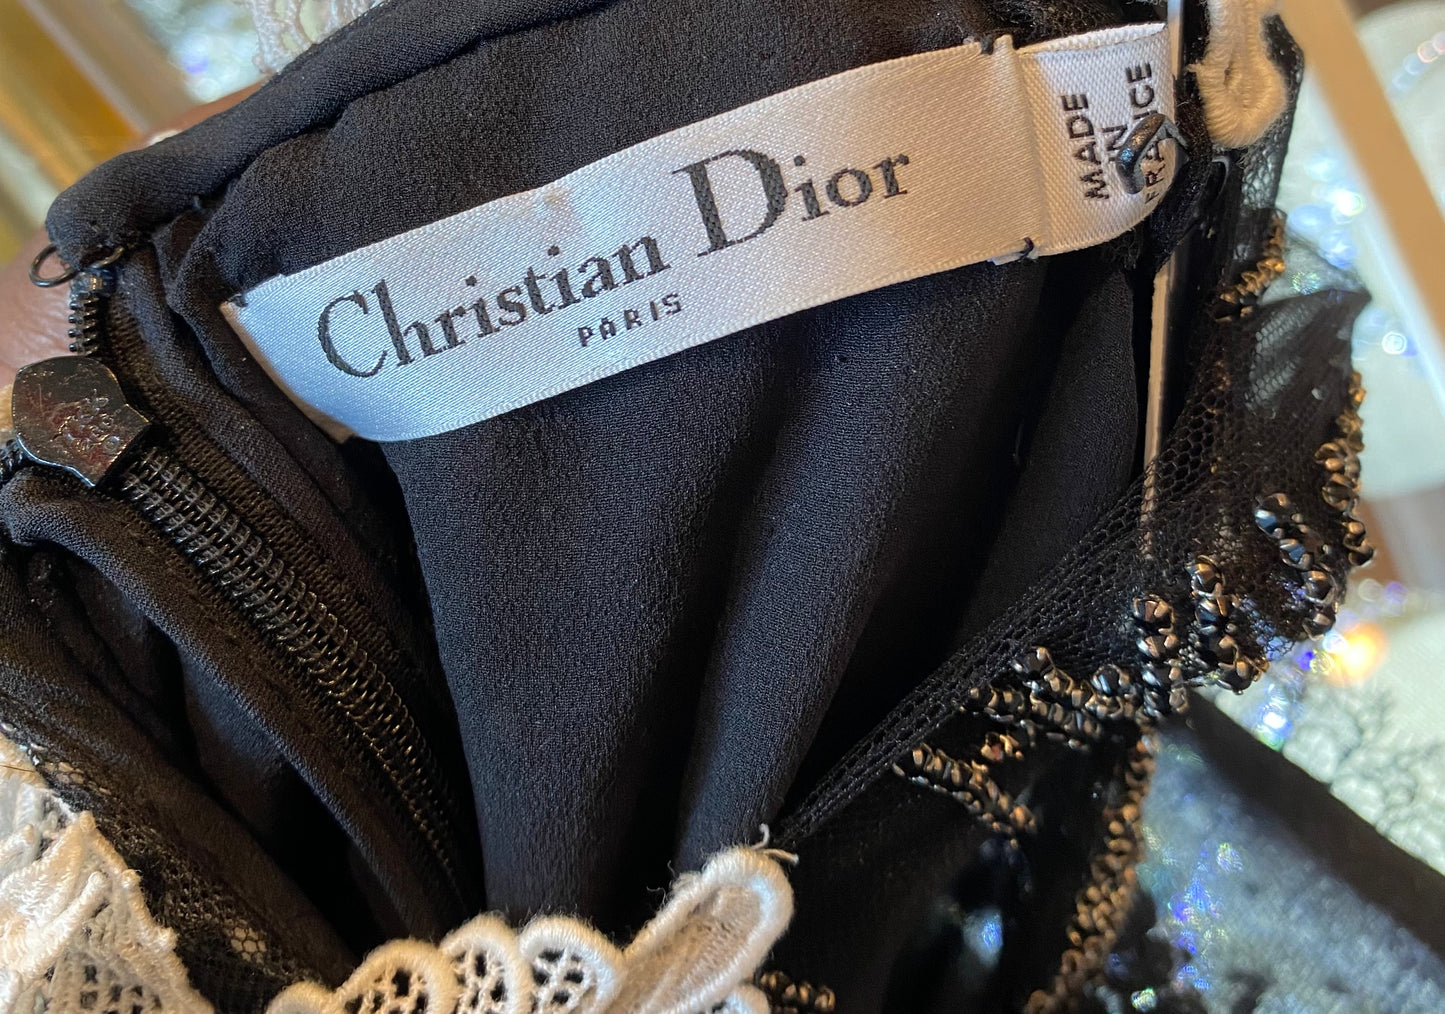 Christian Dior by John Galliano Cruise 2008 Blk/Wht Cocktail Dress